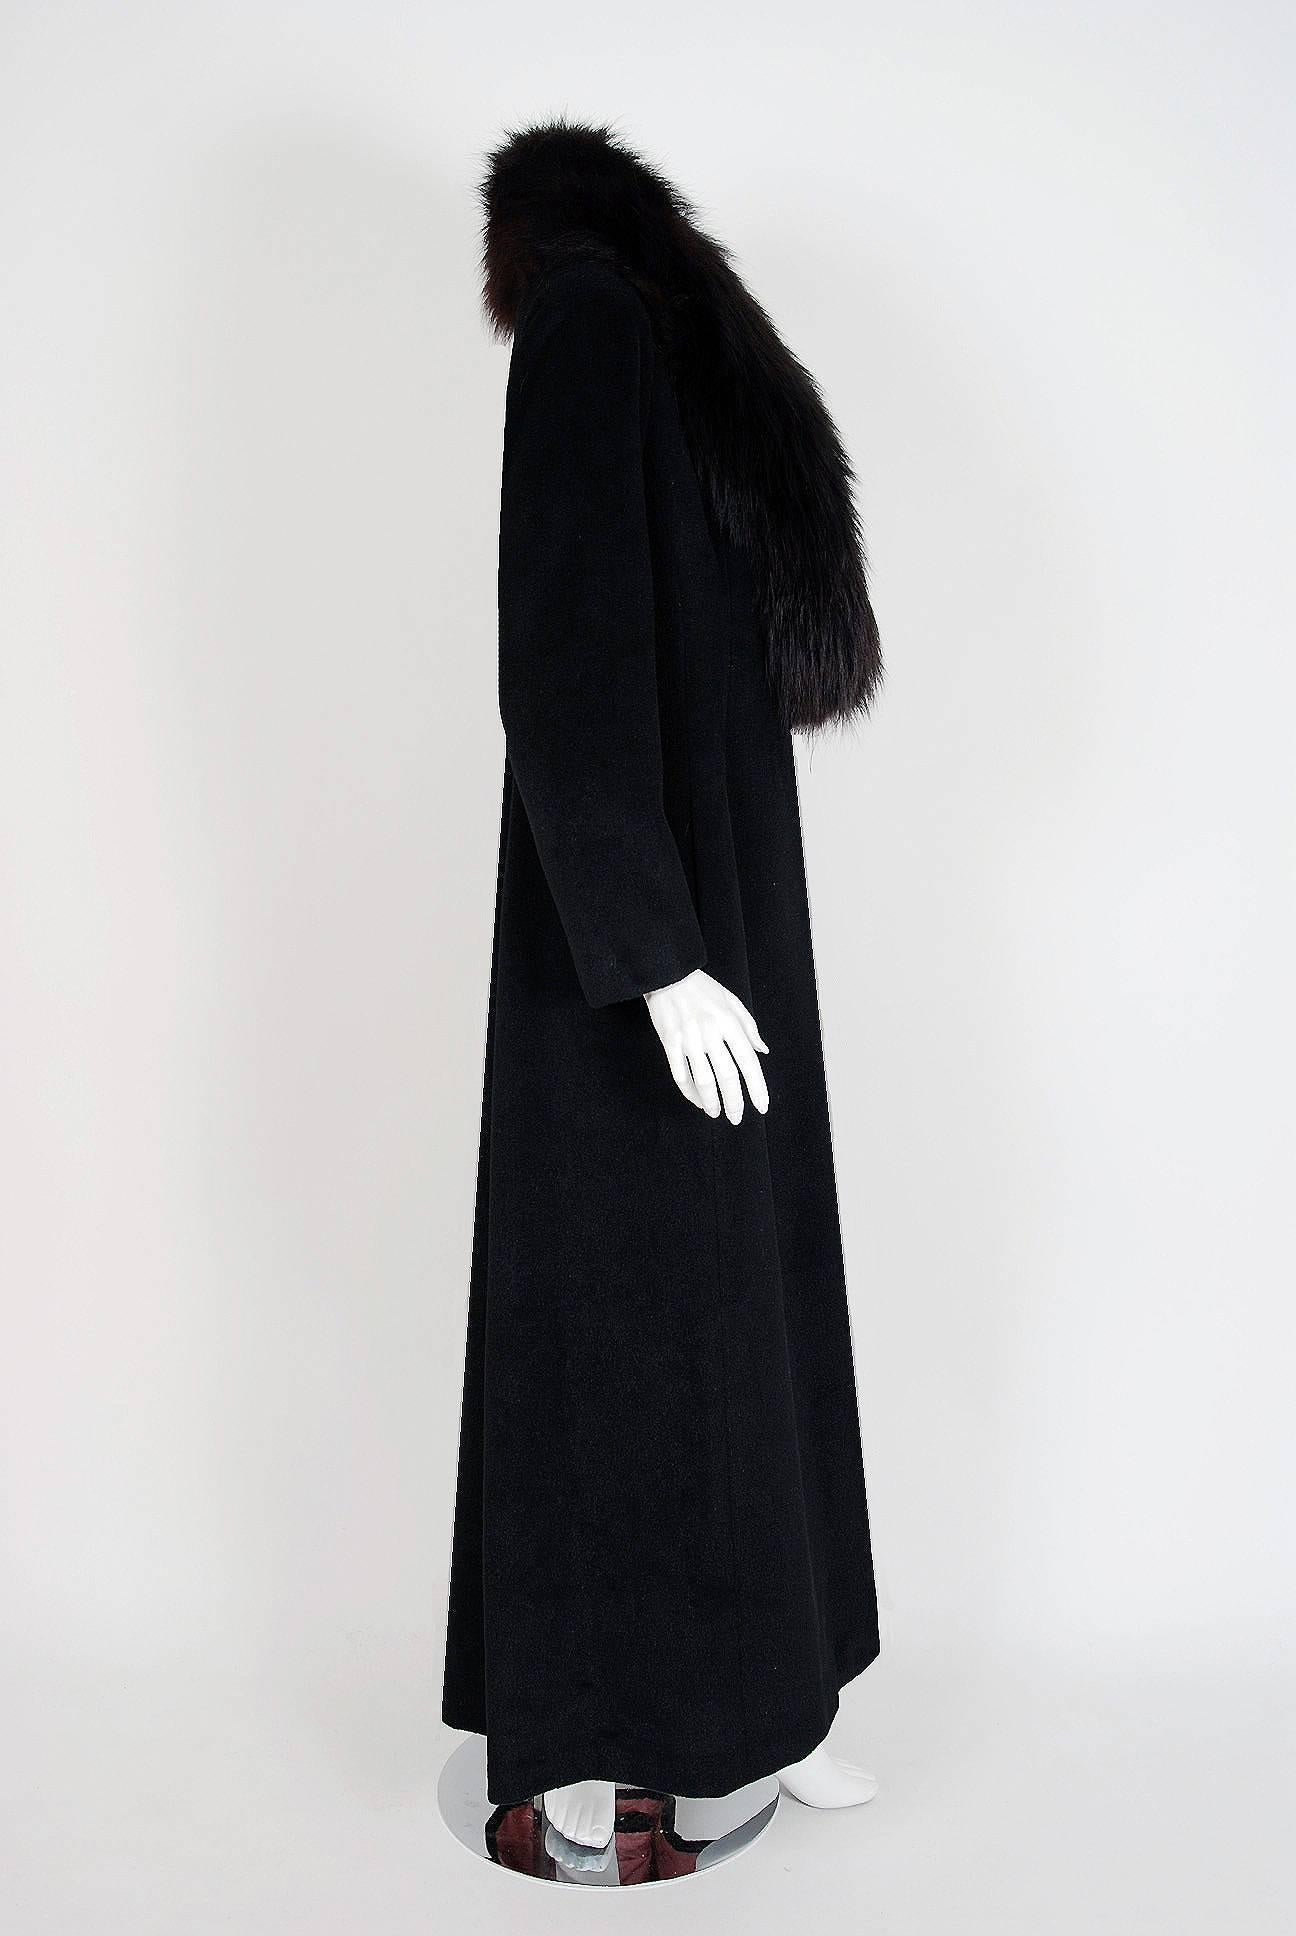 1958 Sorelle Fontana Haute-Couture Black Wool Fox-Fur Coat Owned By Ava Gardner In Excellent Condition In Beverly Hills, CA